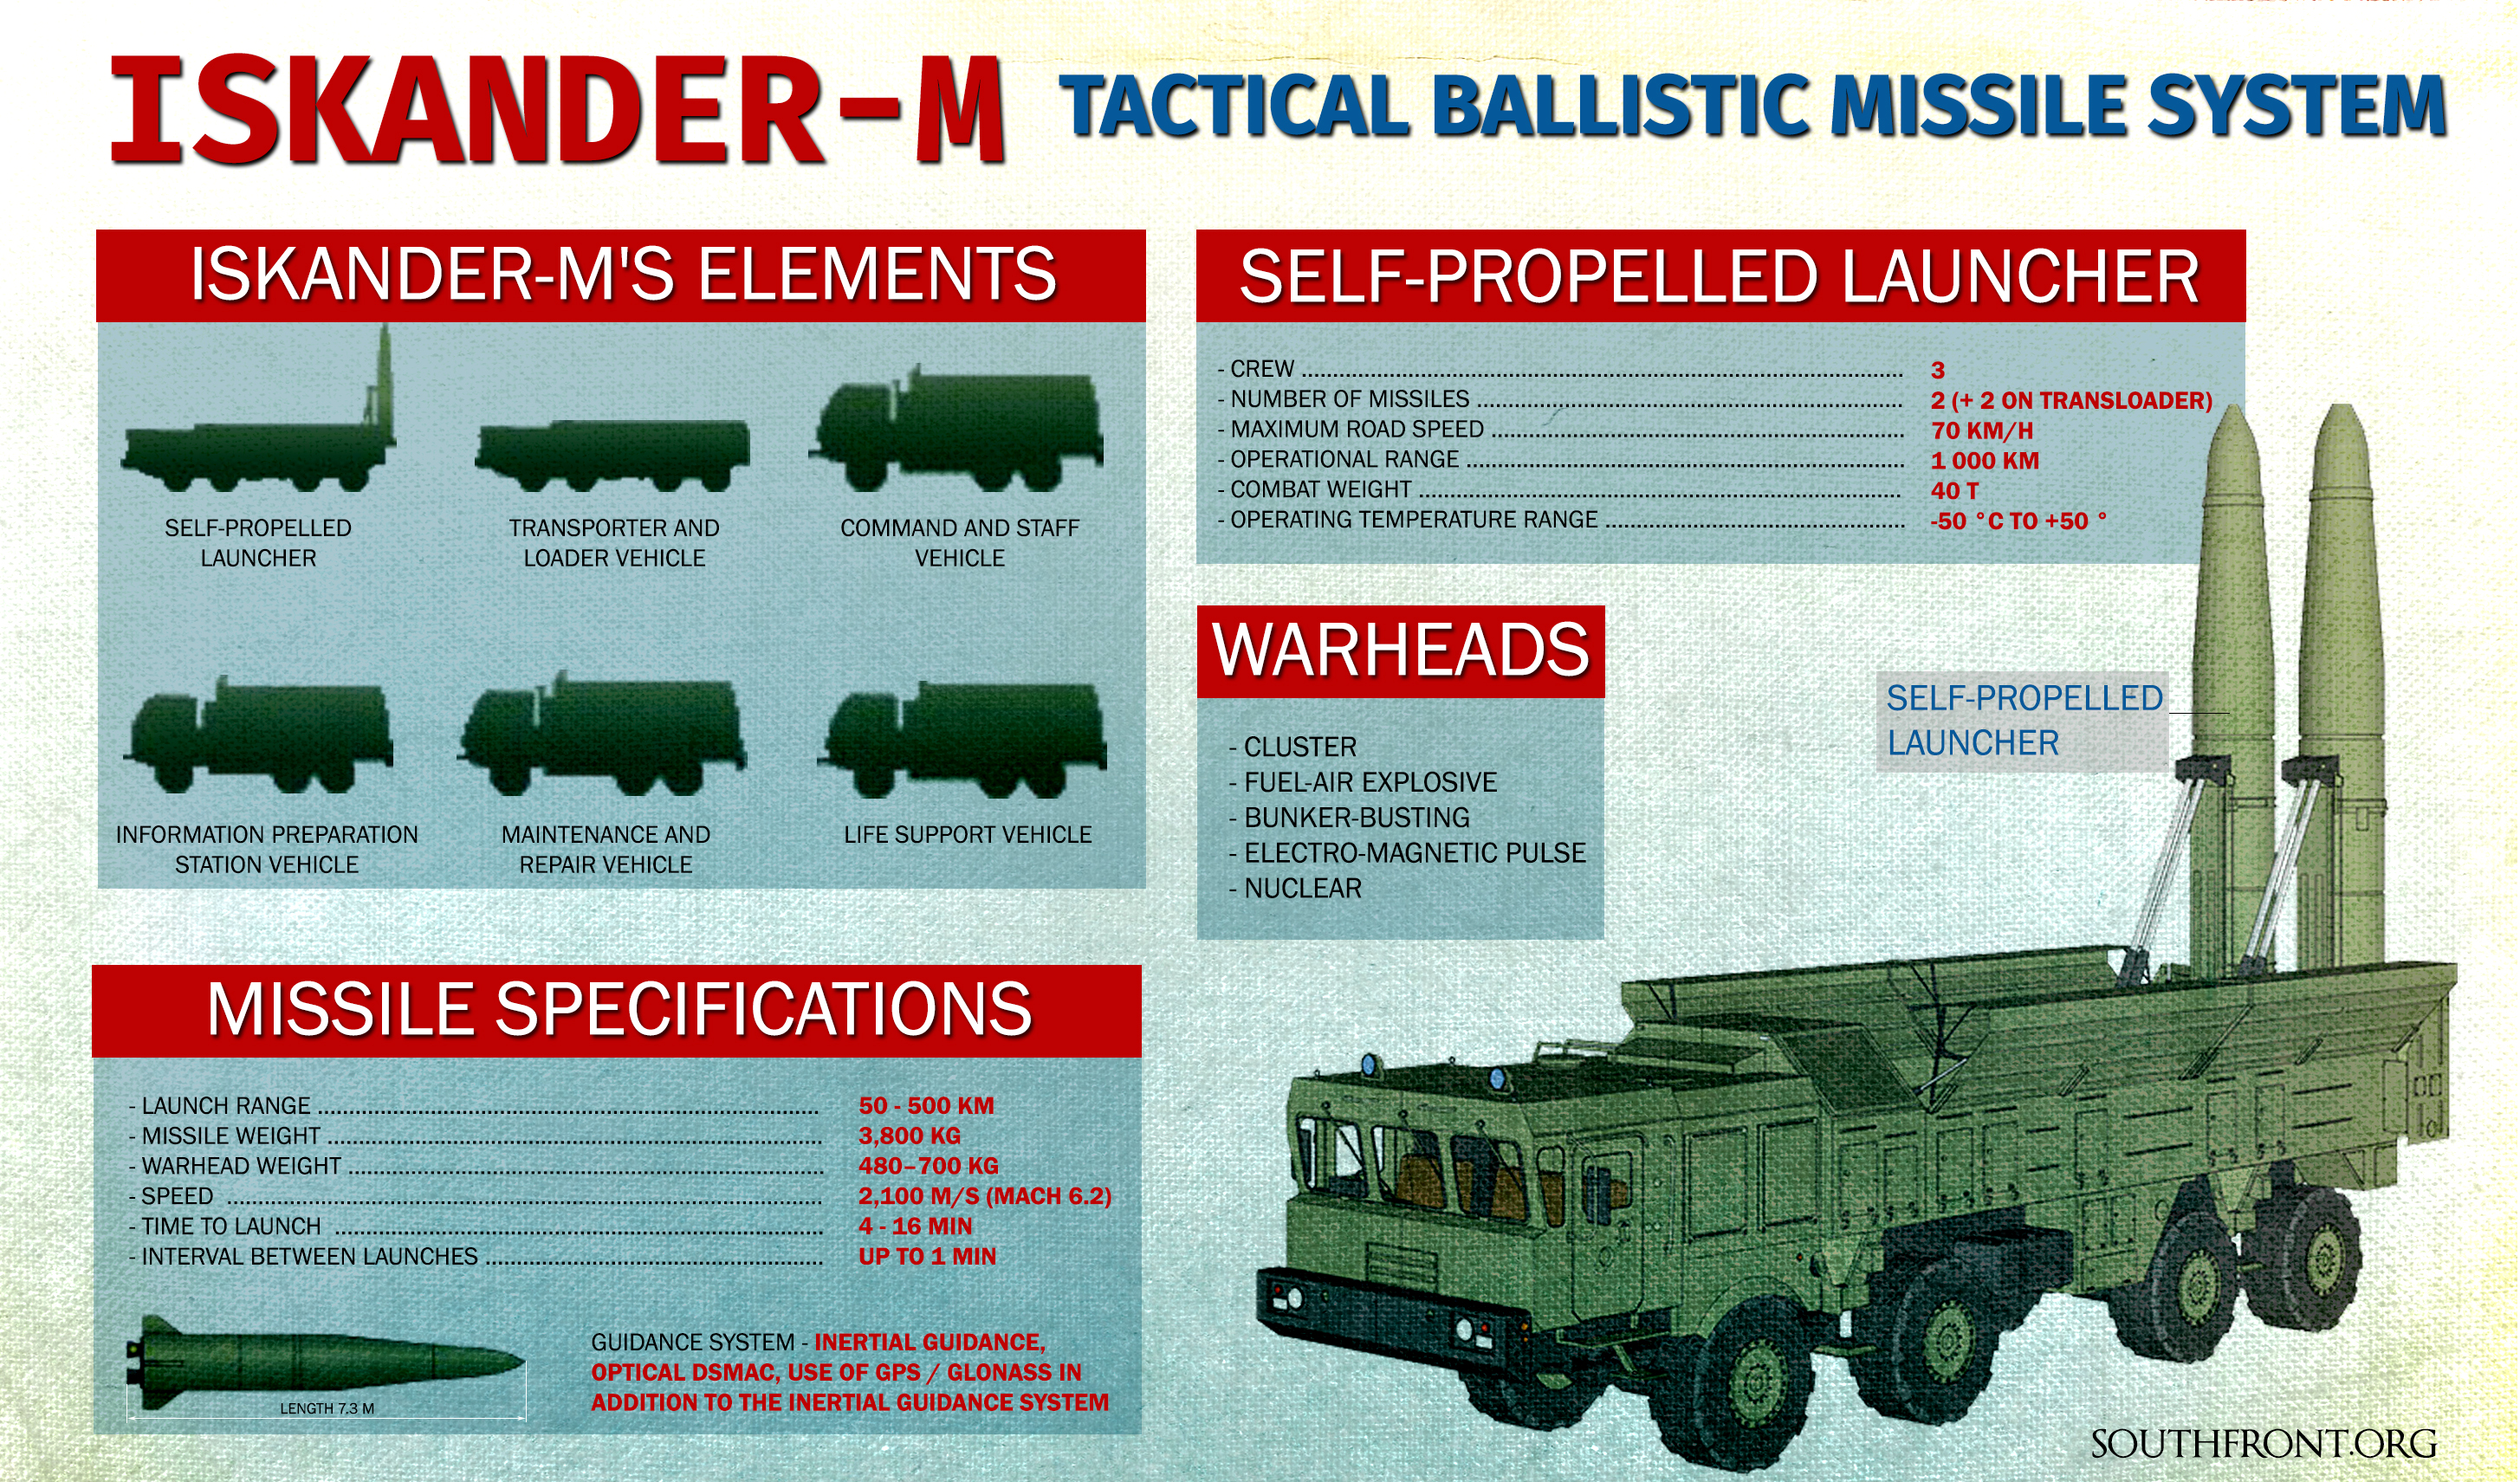 Russia Is Preparing For Permanent Deployment Of  Iskander-M Missile Systems In Kaliningrad - Media